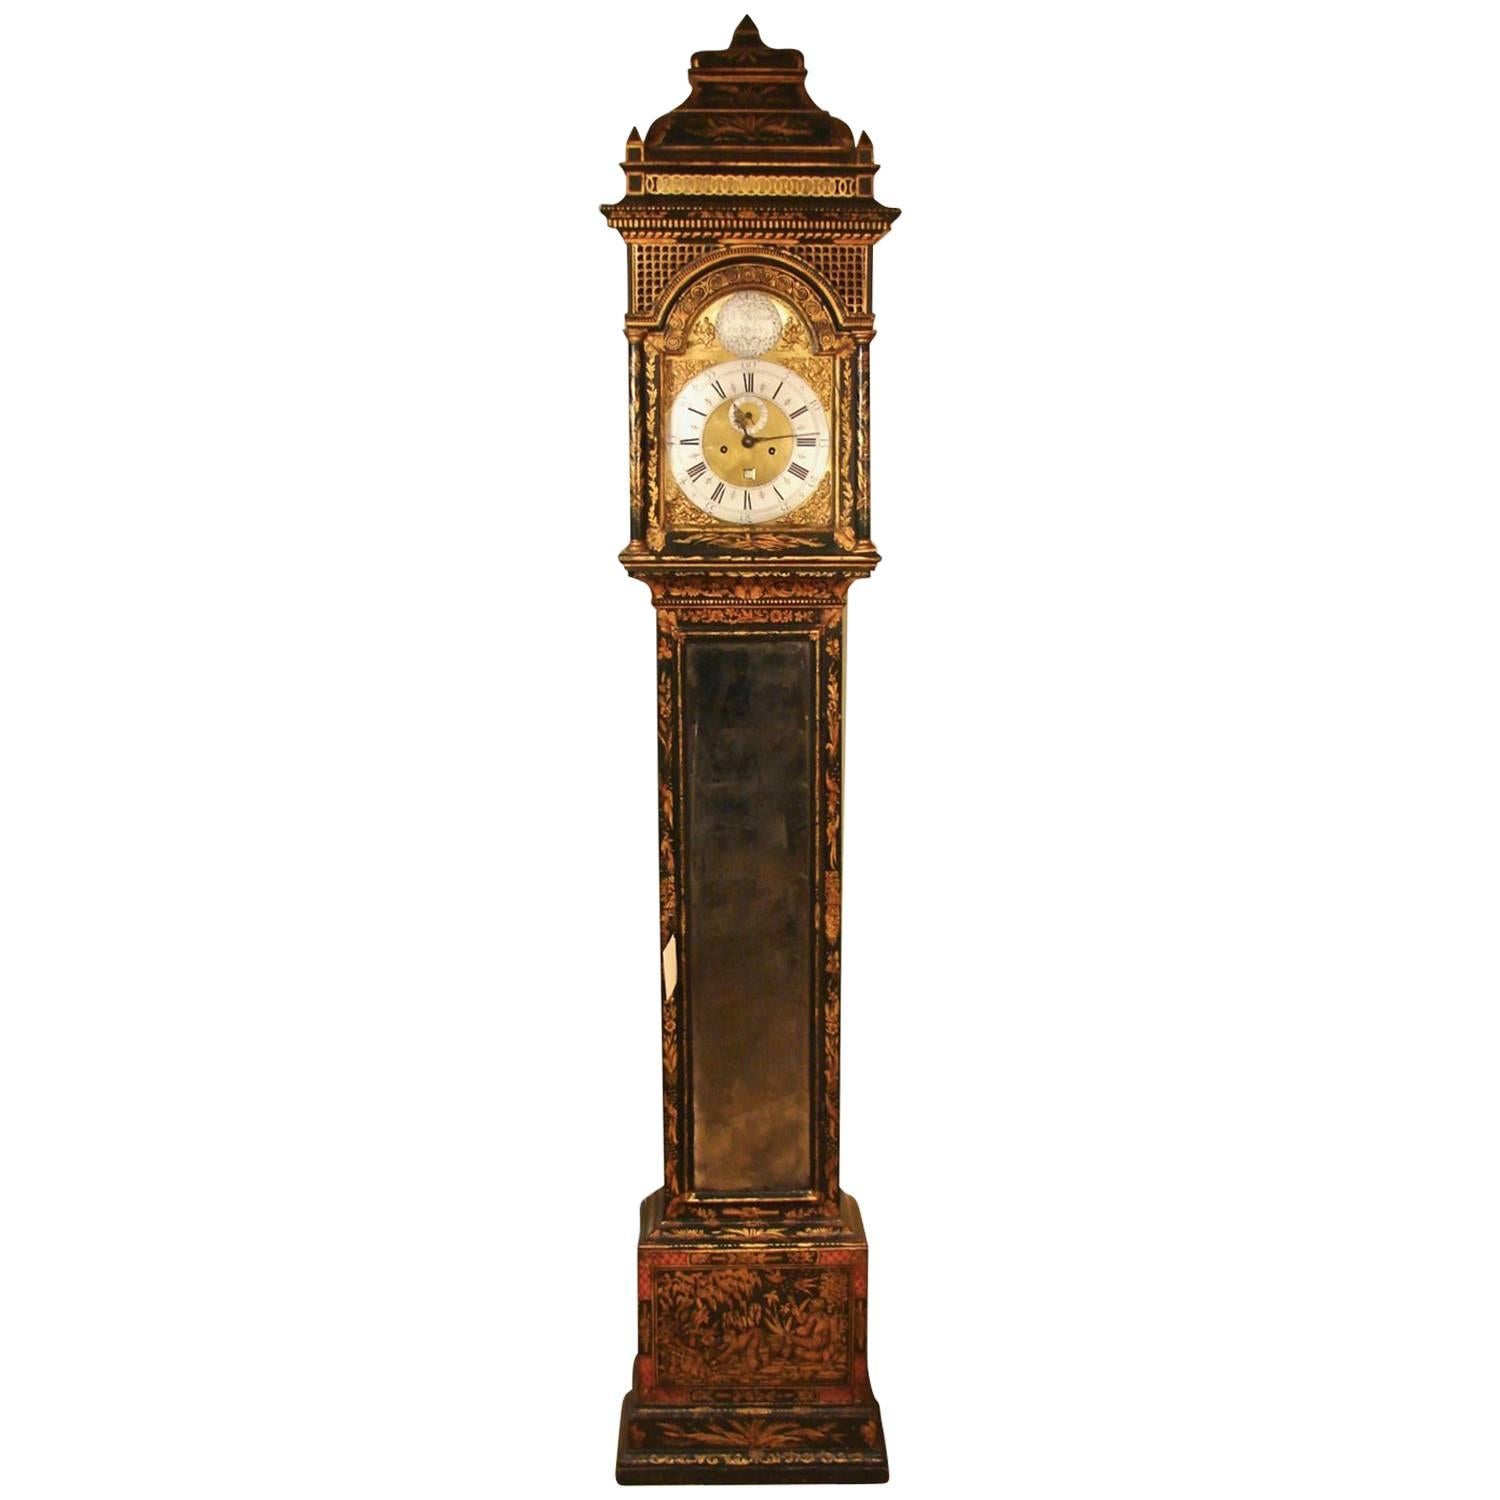 Fine George I Green Japanned Tall Case Clock with Mirrored Door by William King